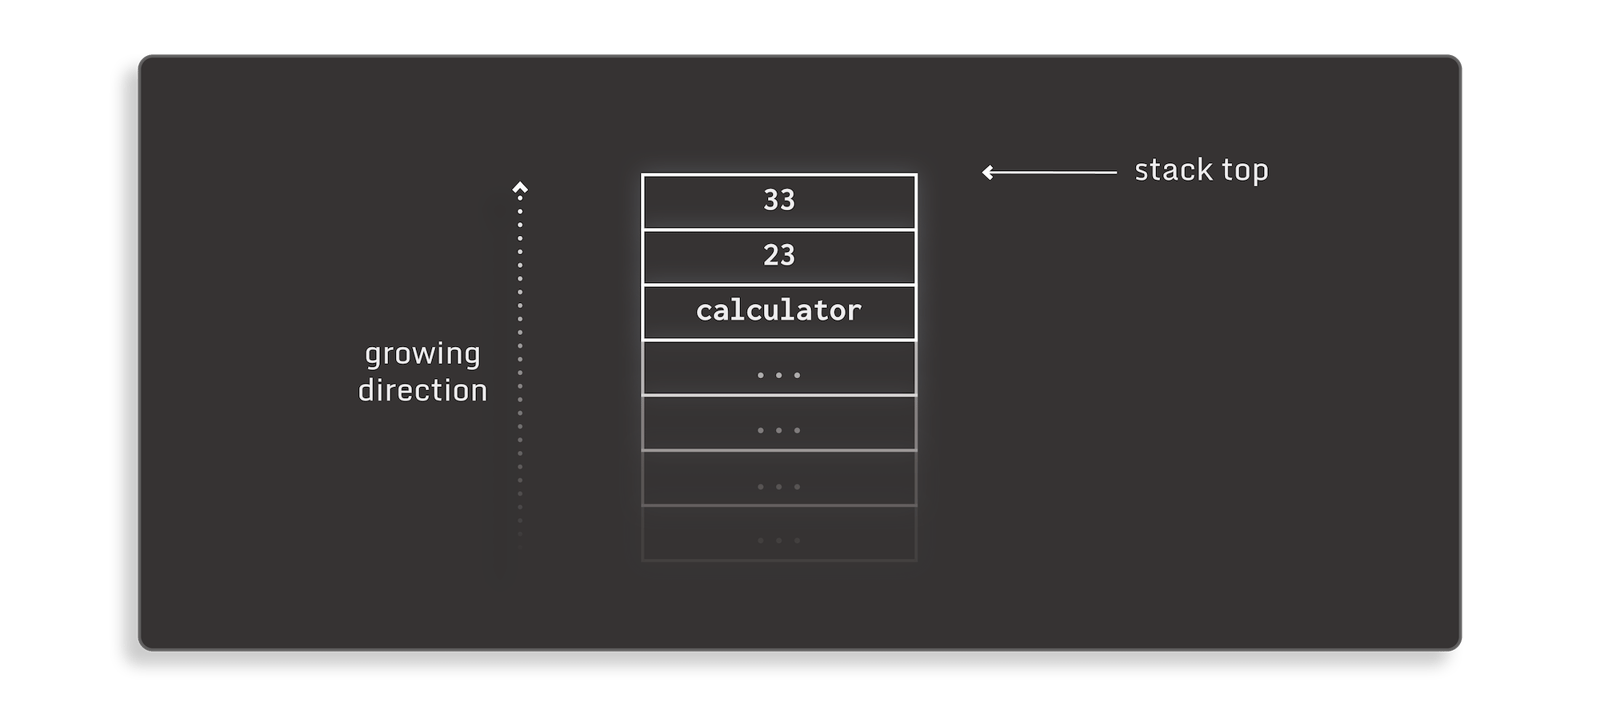 FIG-1_Stack layout before executing calculator.add(22, 33)